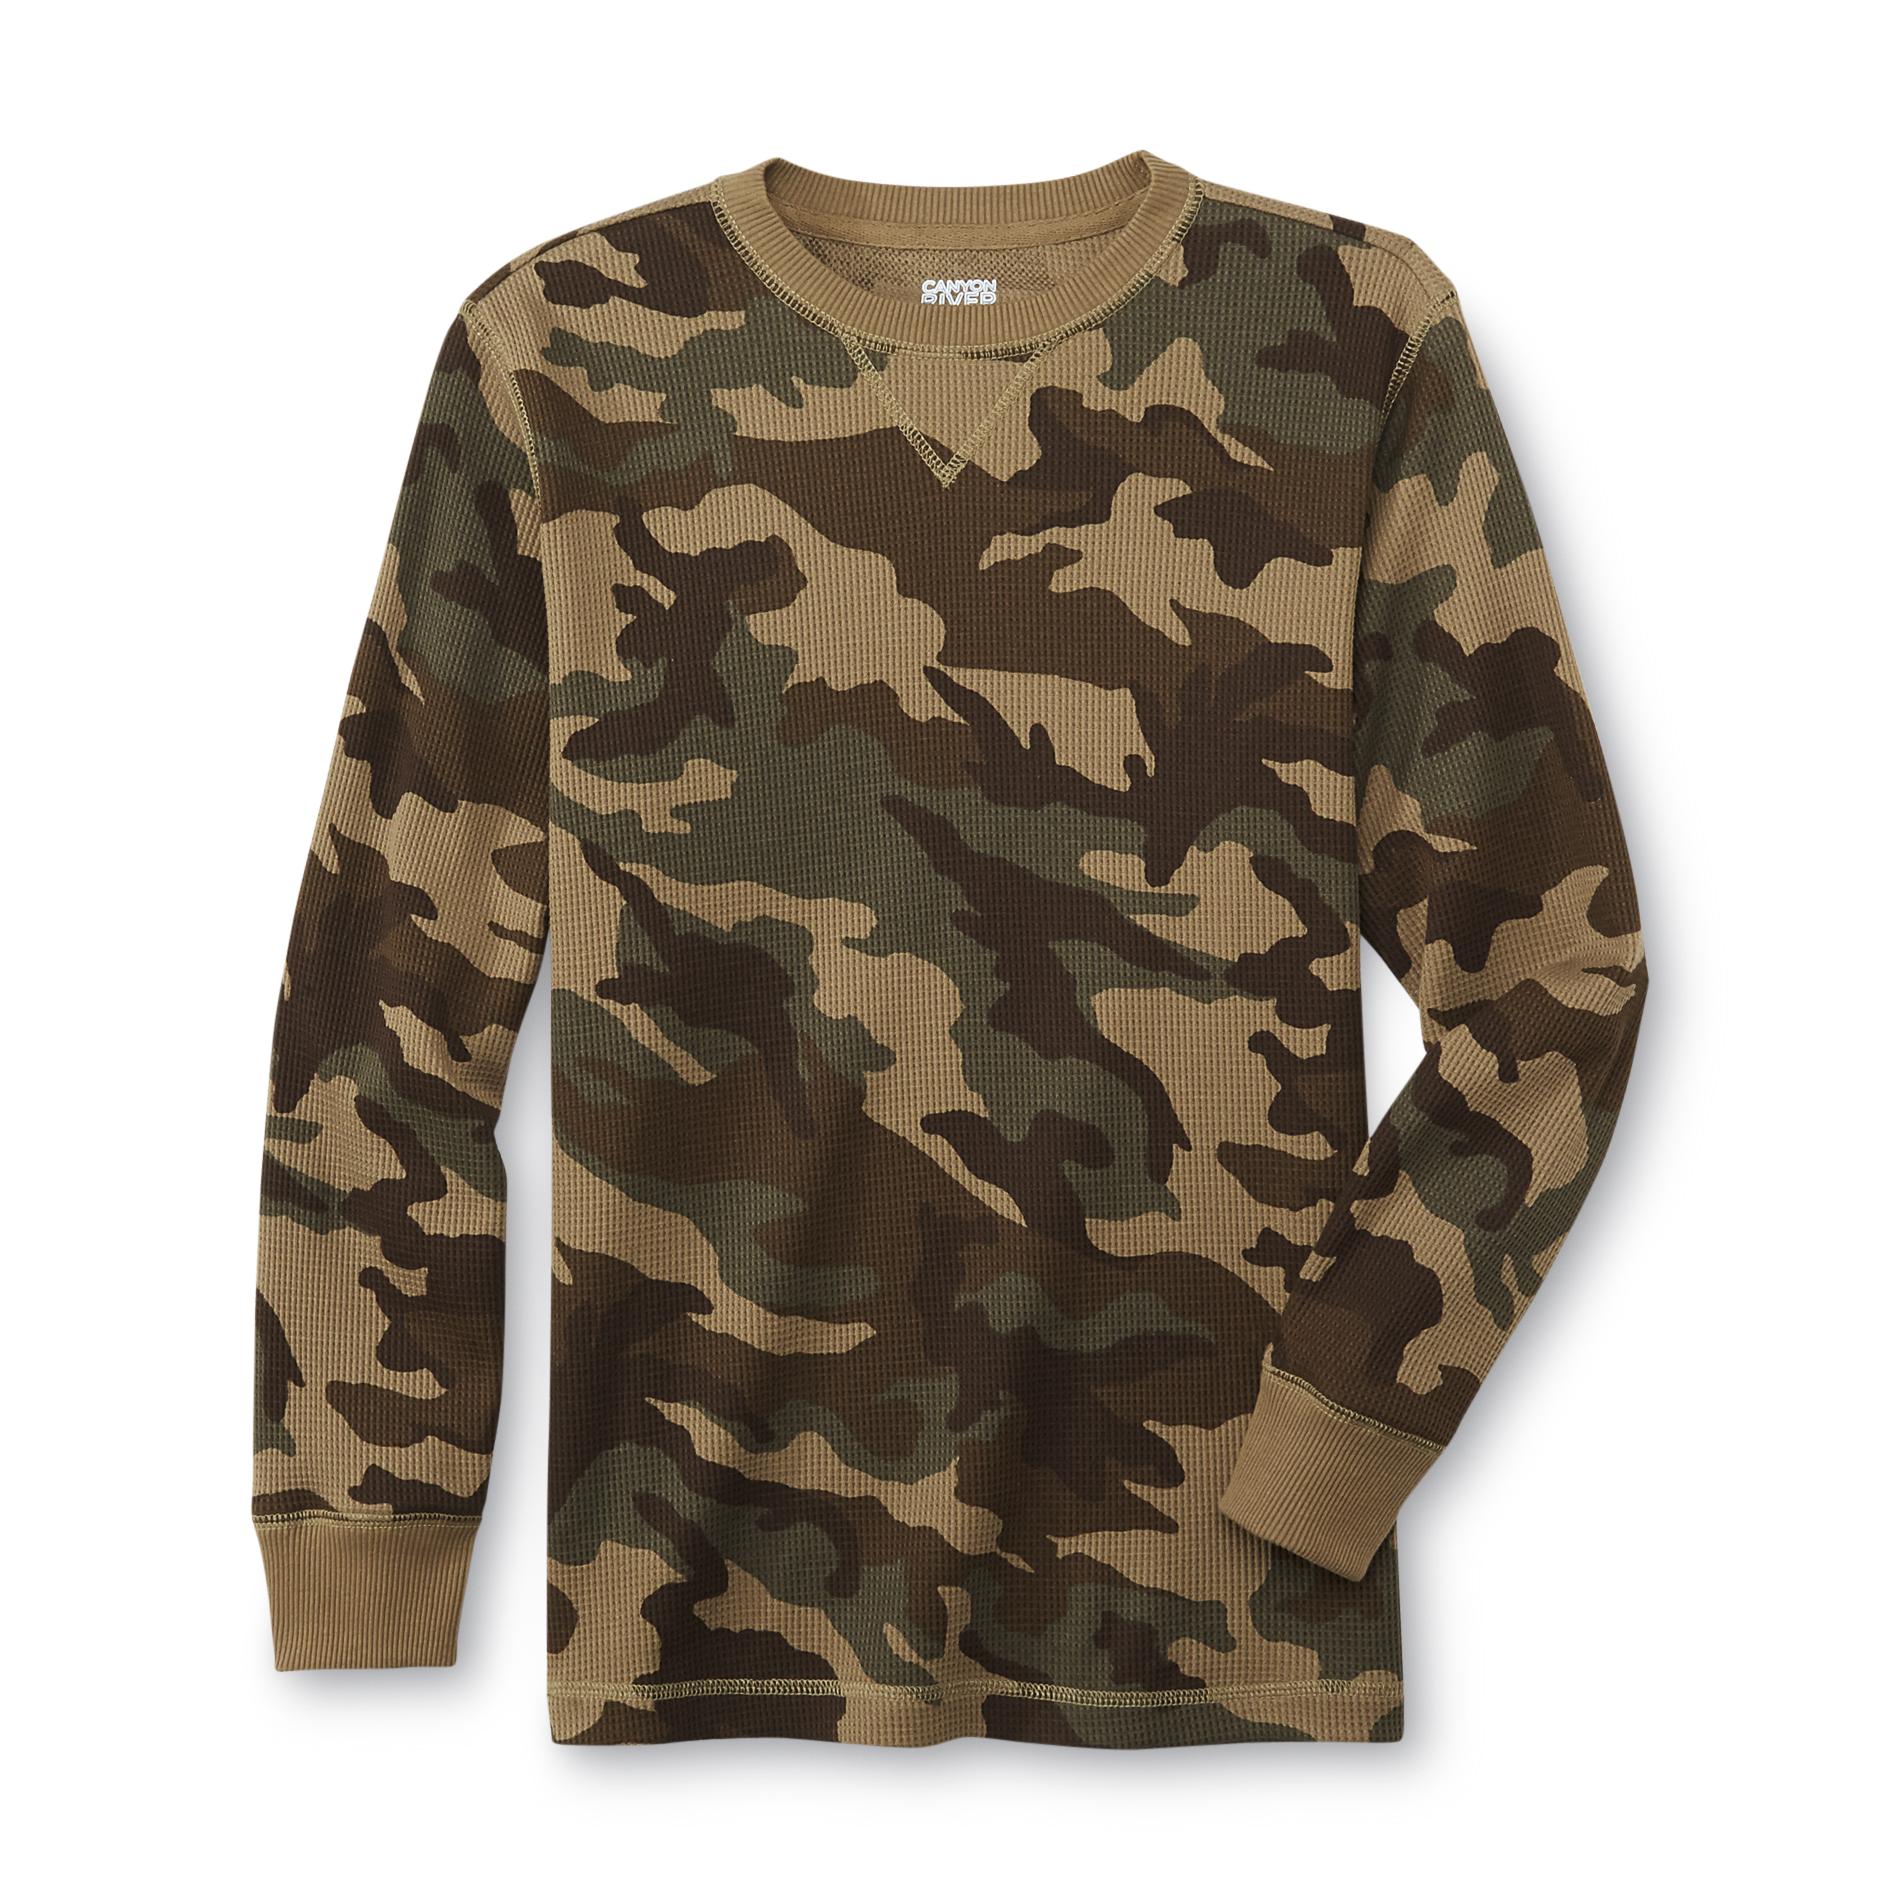 Canyon River Blues Boy's Long-Sleeve Thermal Shirt - Camouflage